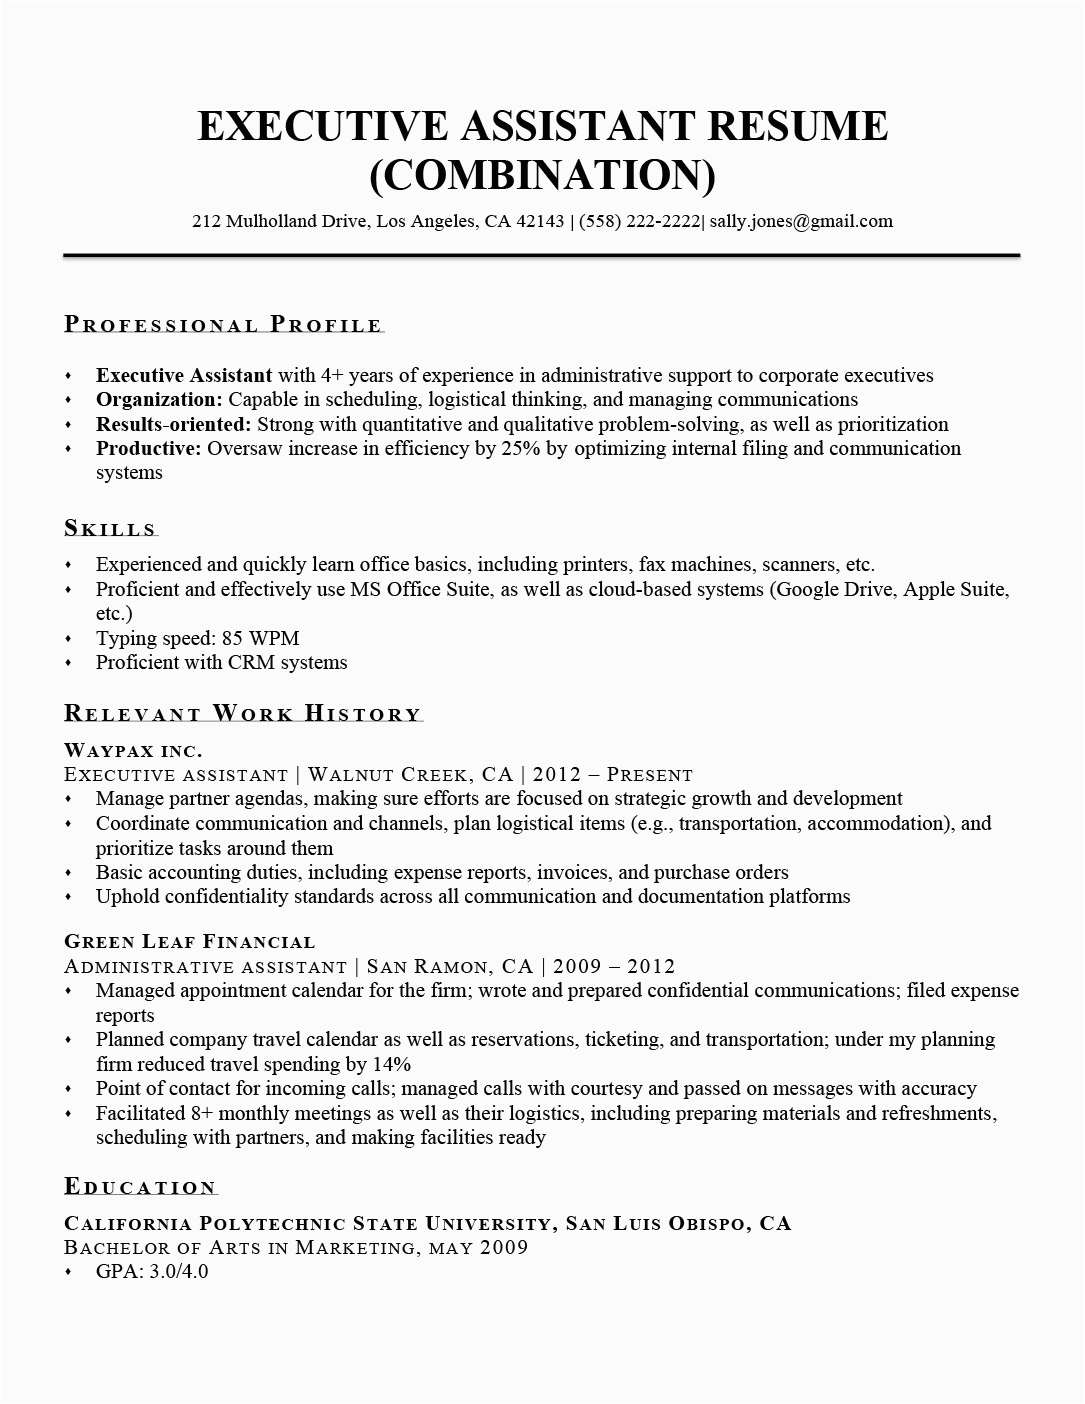 Sample Of Resume for Executive assistant Executive assistant Resume Example